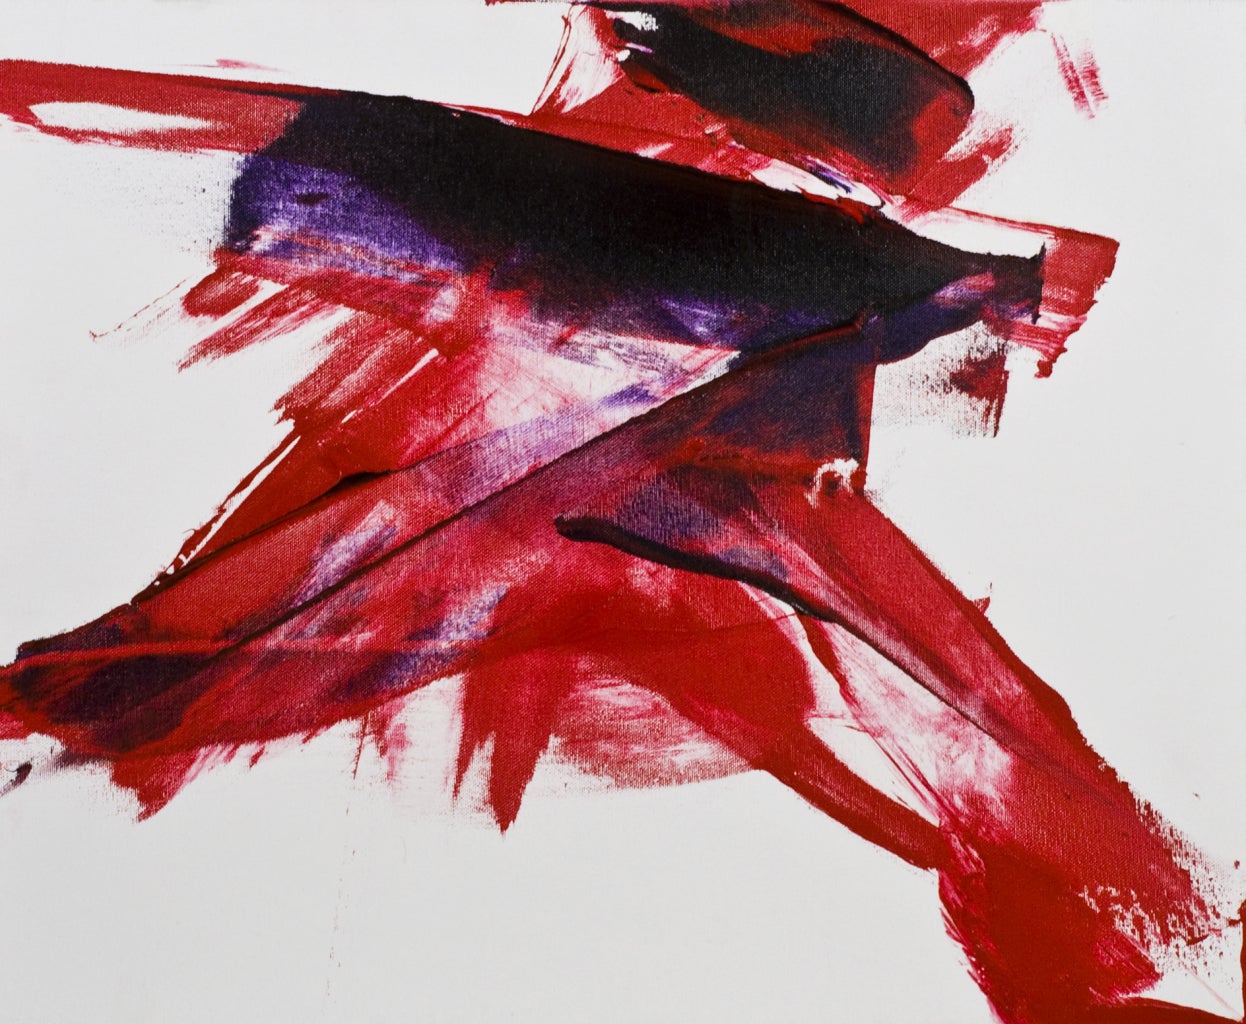 Luis Feito López Abstract Painting - Luis Feito, Abstract Red and Black, Oil on canvas, 2574